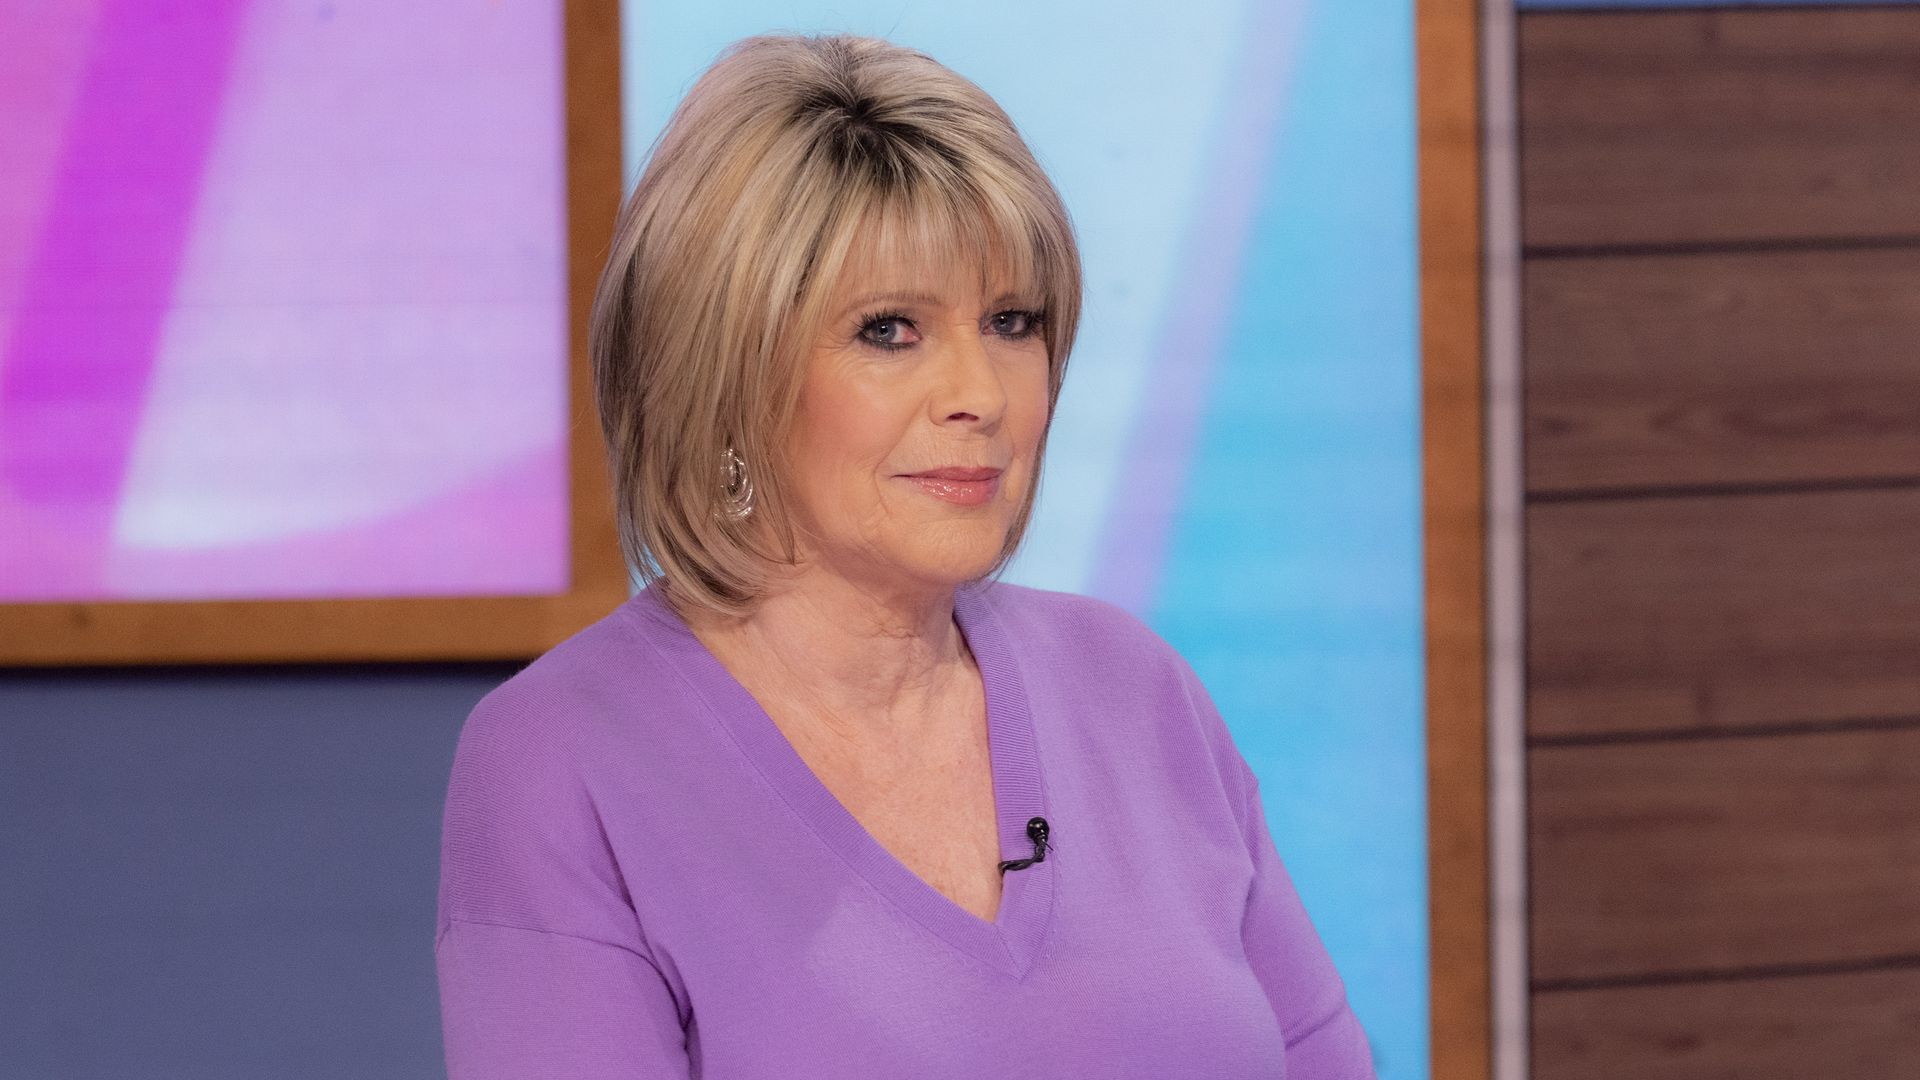 Ruth Langsford in lavender with blank expression